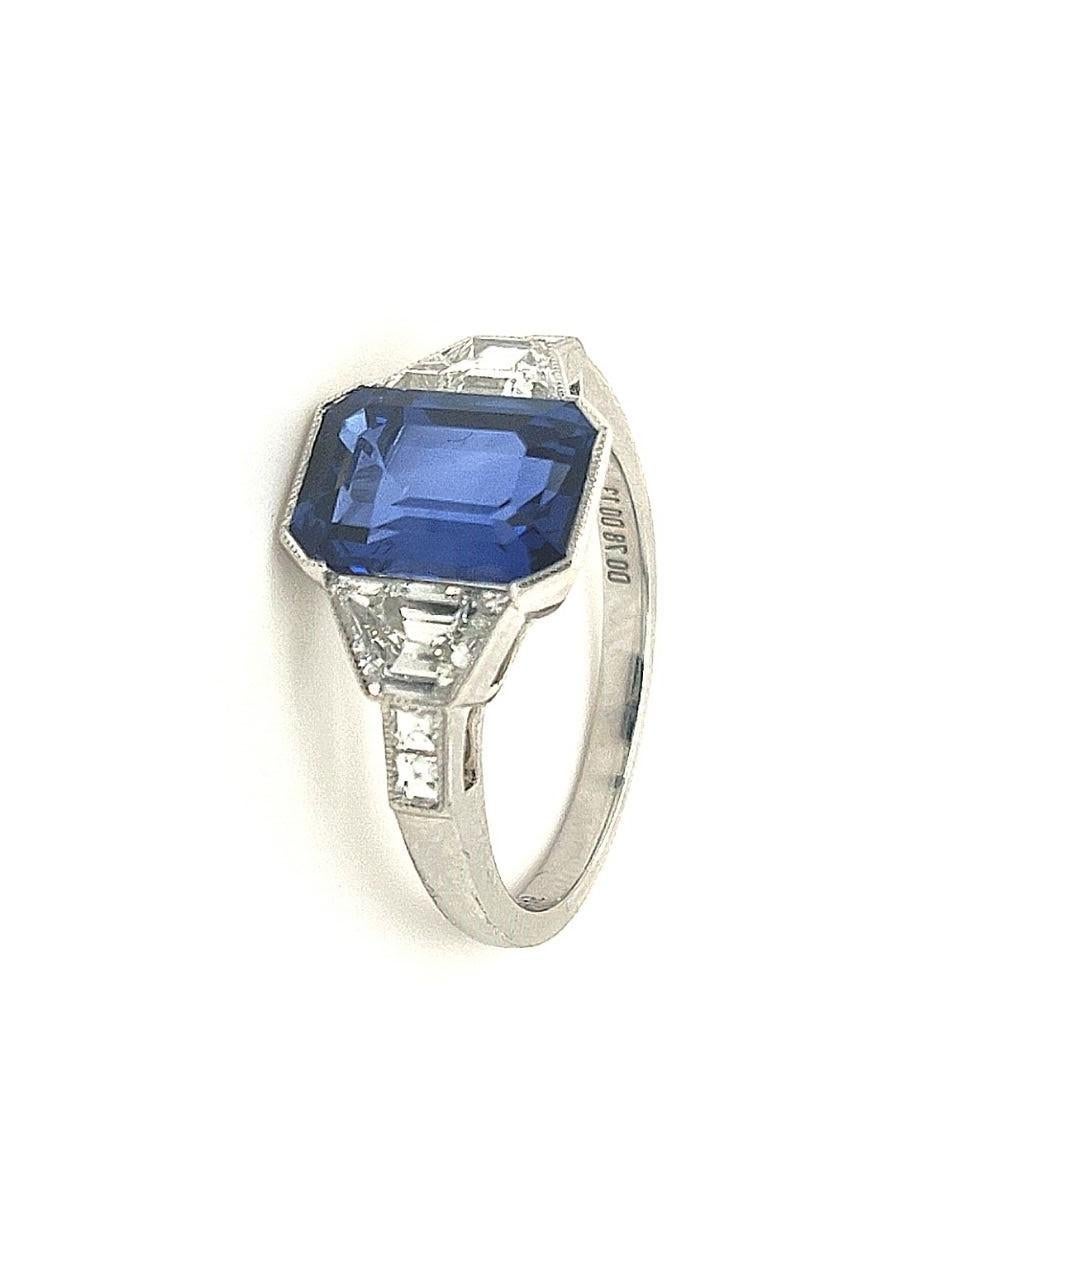 Octagon Cut Sophia D, Certified 3.15 Carat Sapphire and Diamond Art Deco Ring in Platinum For Sale